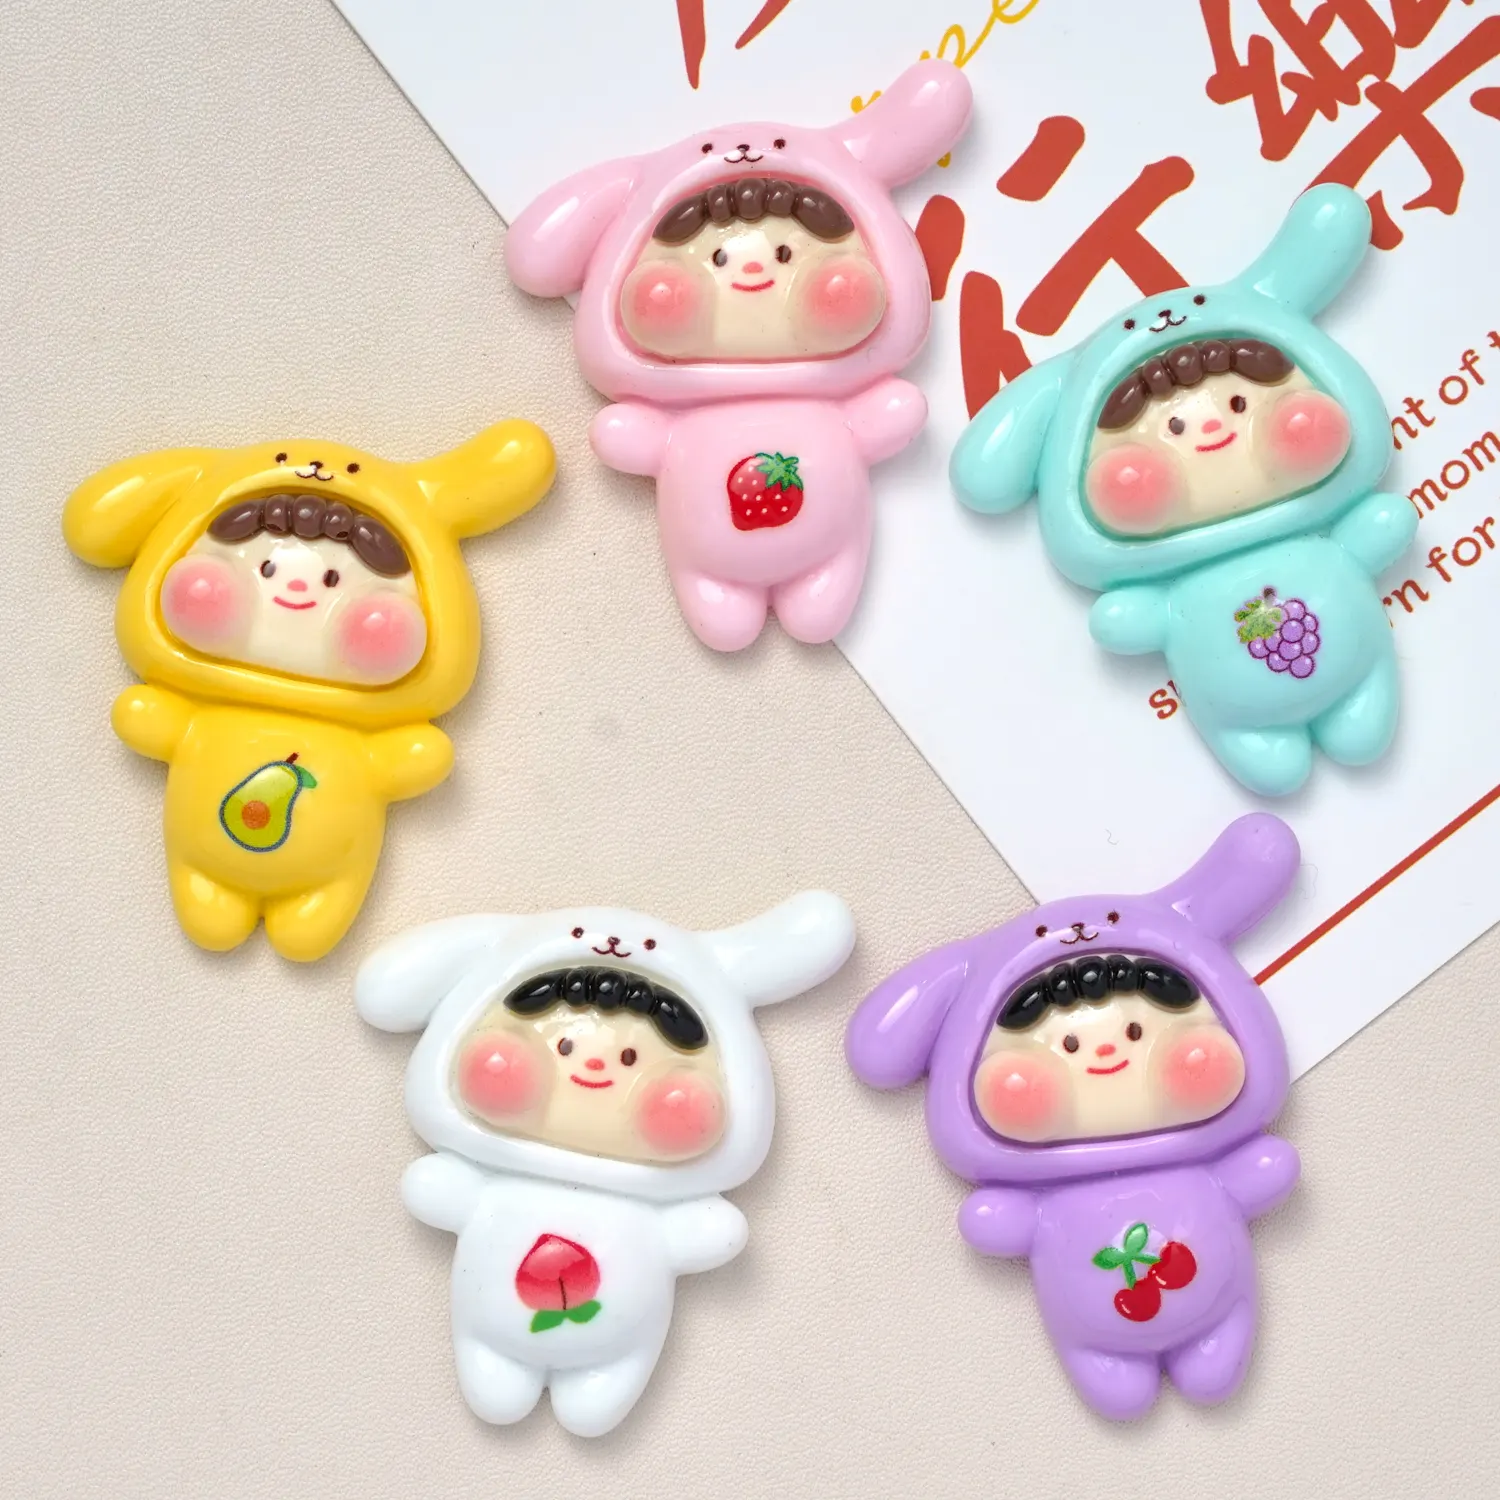 New style large cartoon fruit baby flatback resin charms crafts for cell phone chain pendant handmade hairpin DIY decoration